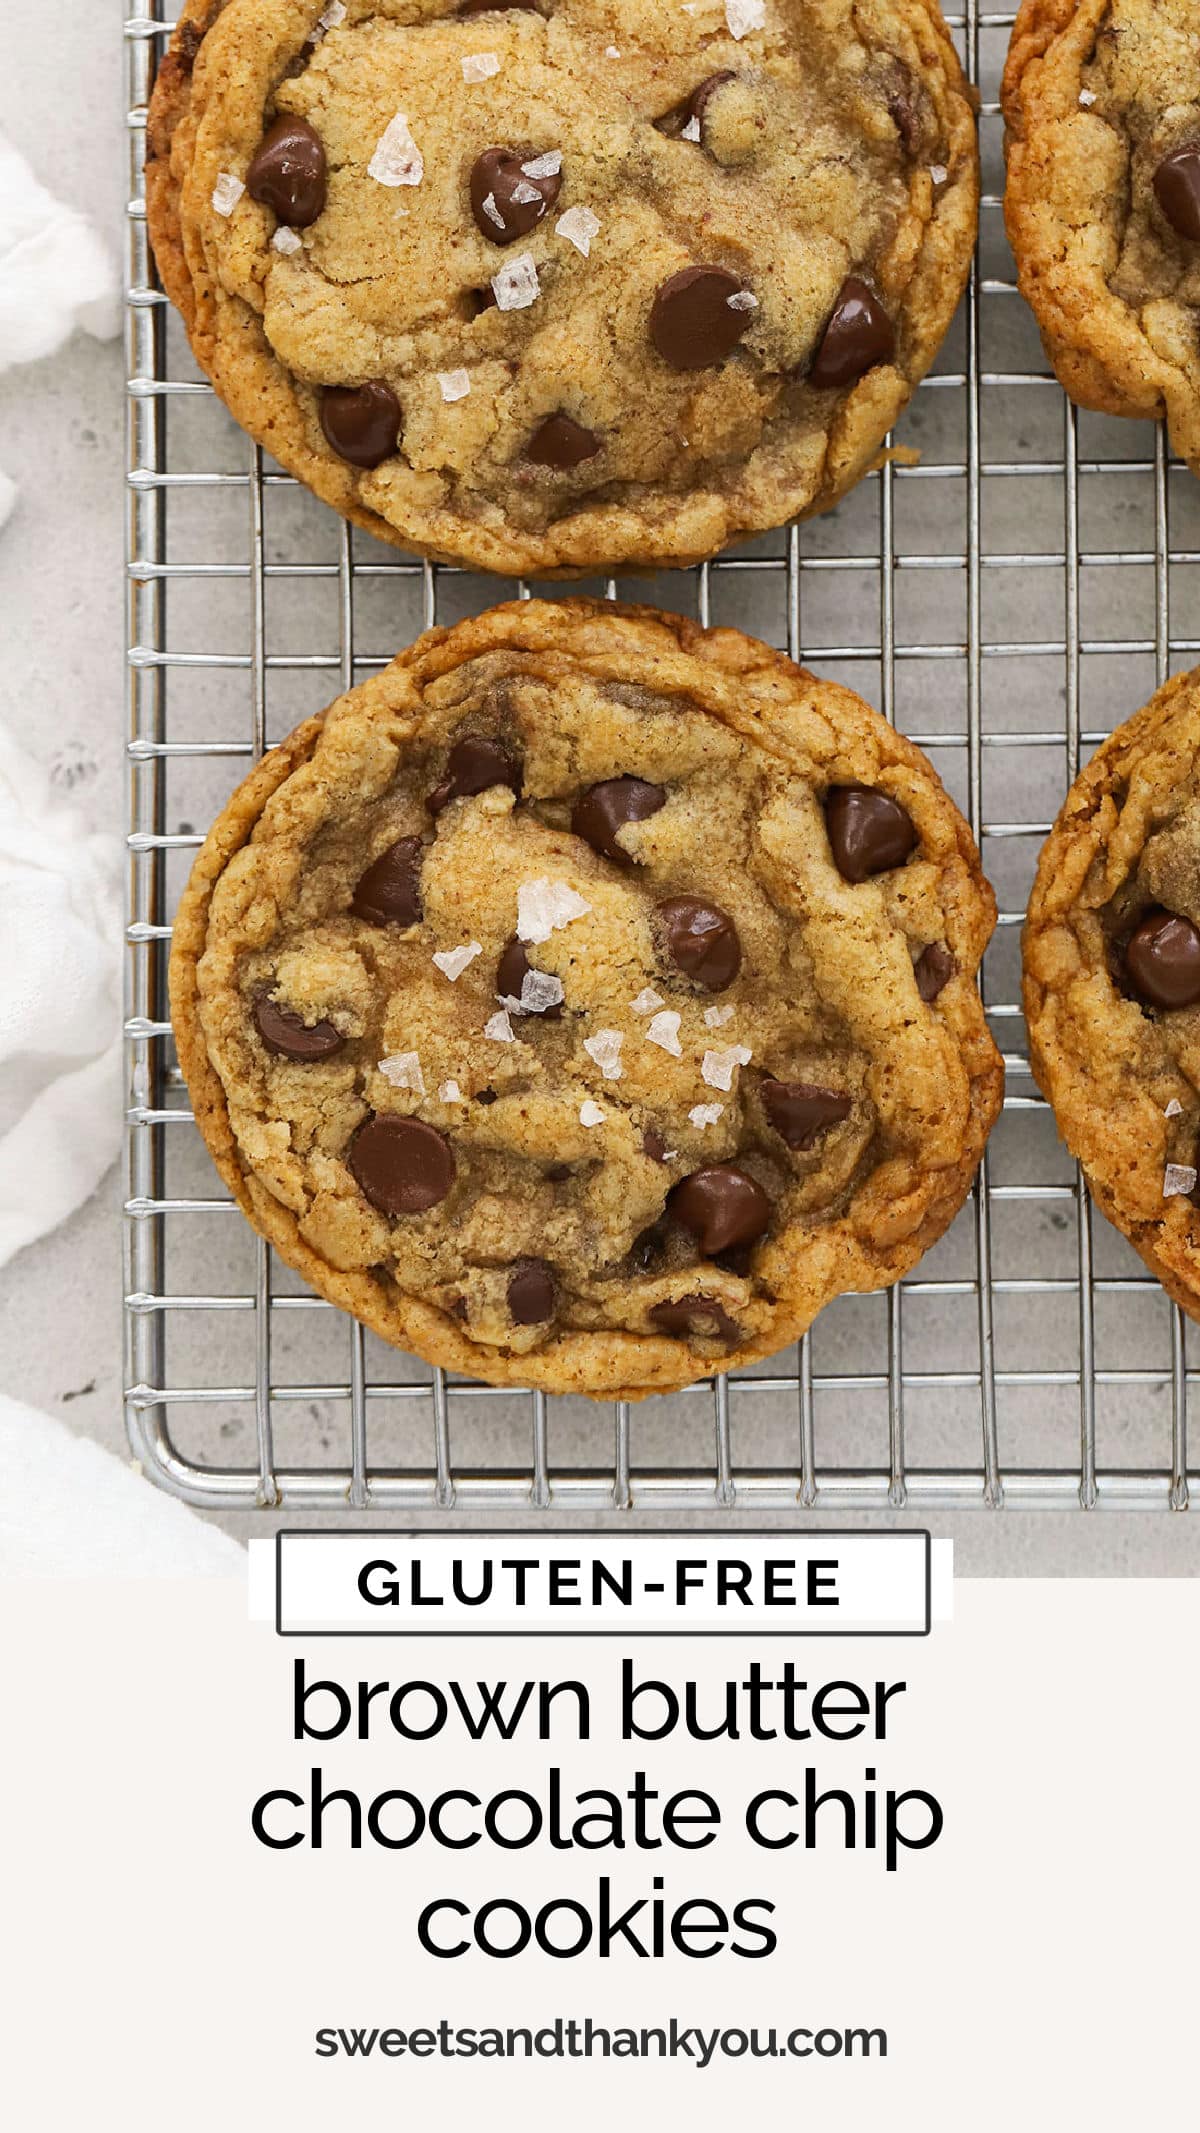 These gluten-free brown butter chocolate chip cookies are cookie PERFECTION. With their golden, crisp edges, chewy centers & TONS flavor in every bite, we think they're the best gluten-free chocolate chip cookies recipe around! They're made from simple ingredients with just a few tricks to give them amazing flavor and texture. (The perfect gluten-free cookie recipe for beginners!)